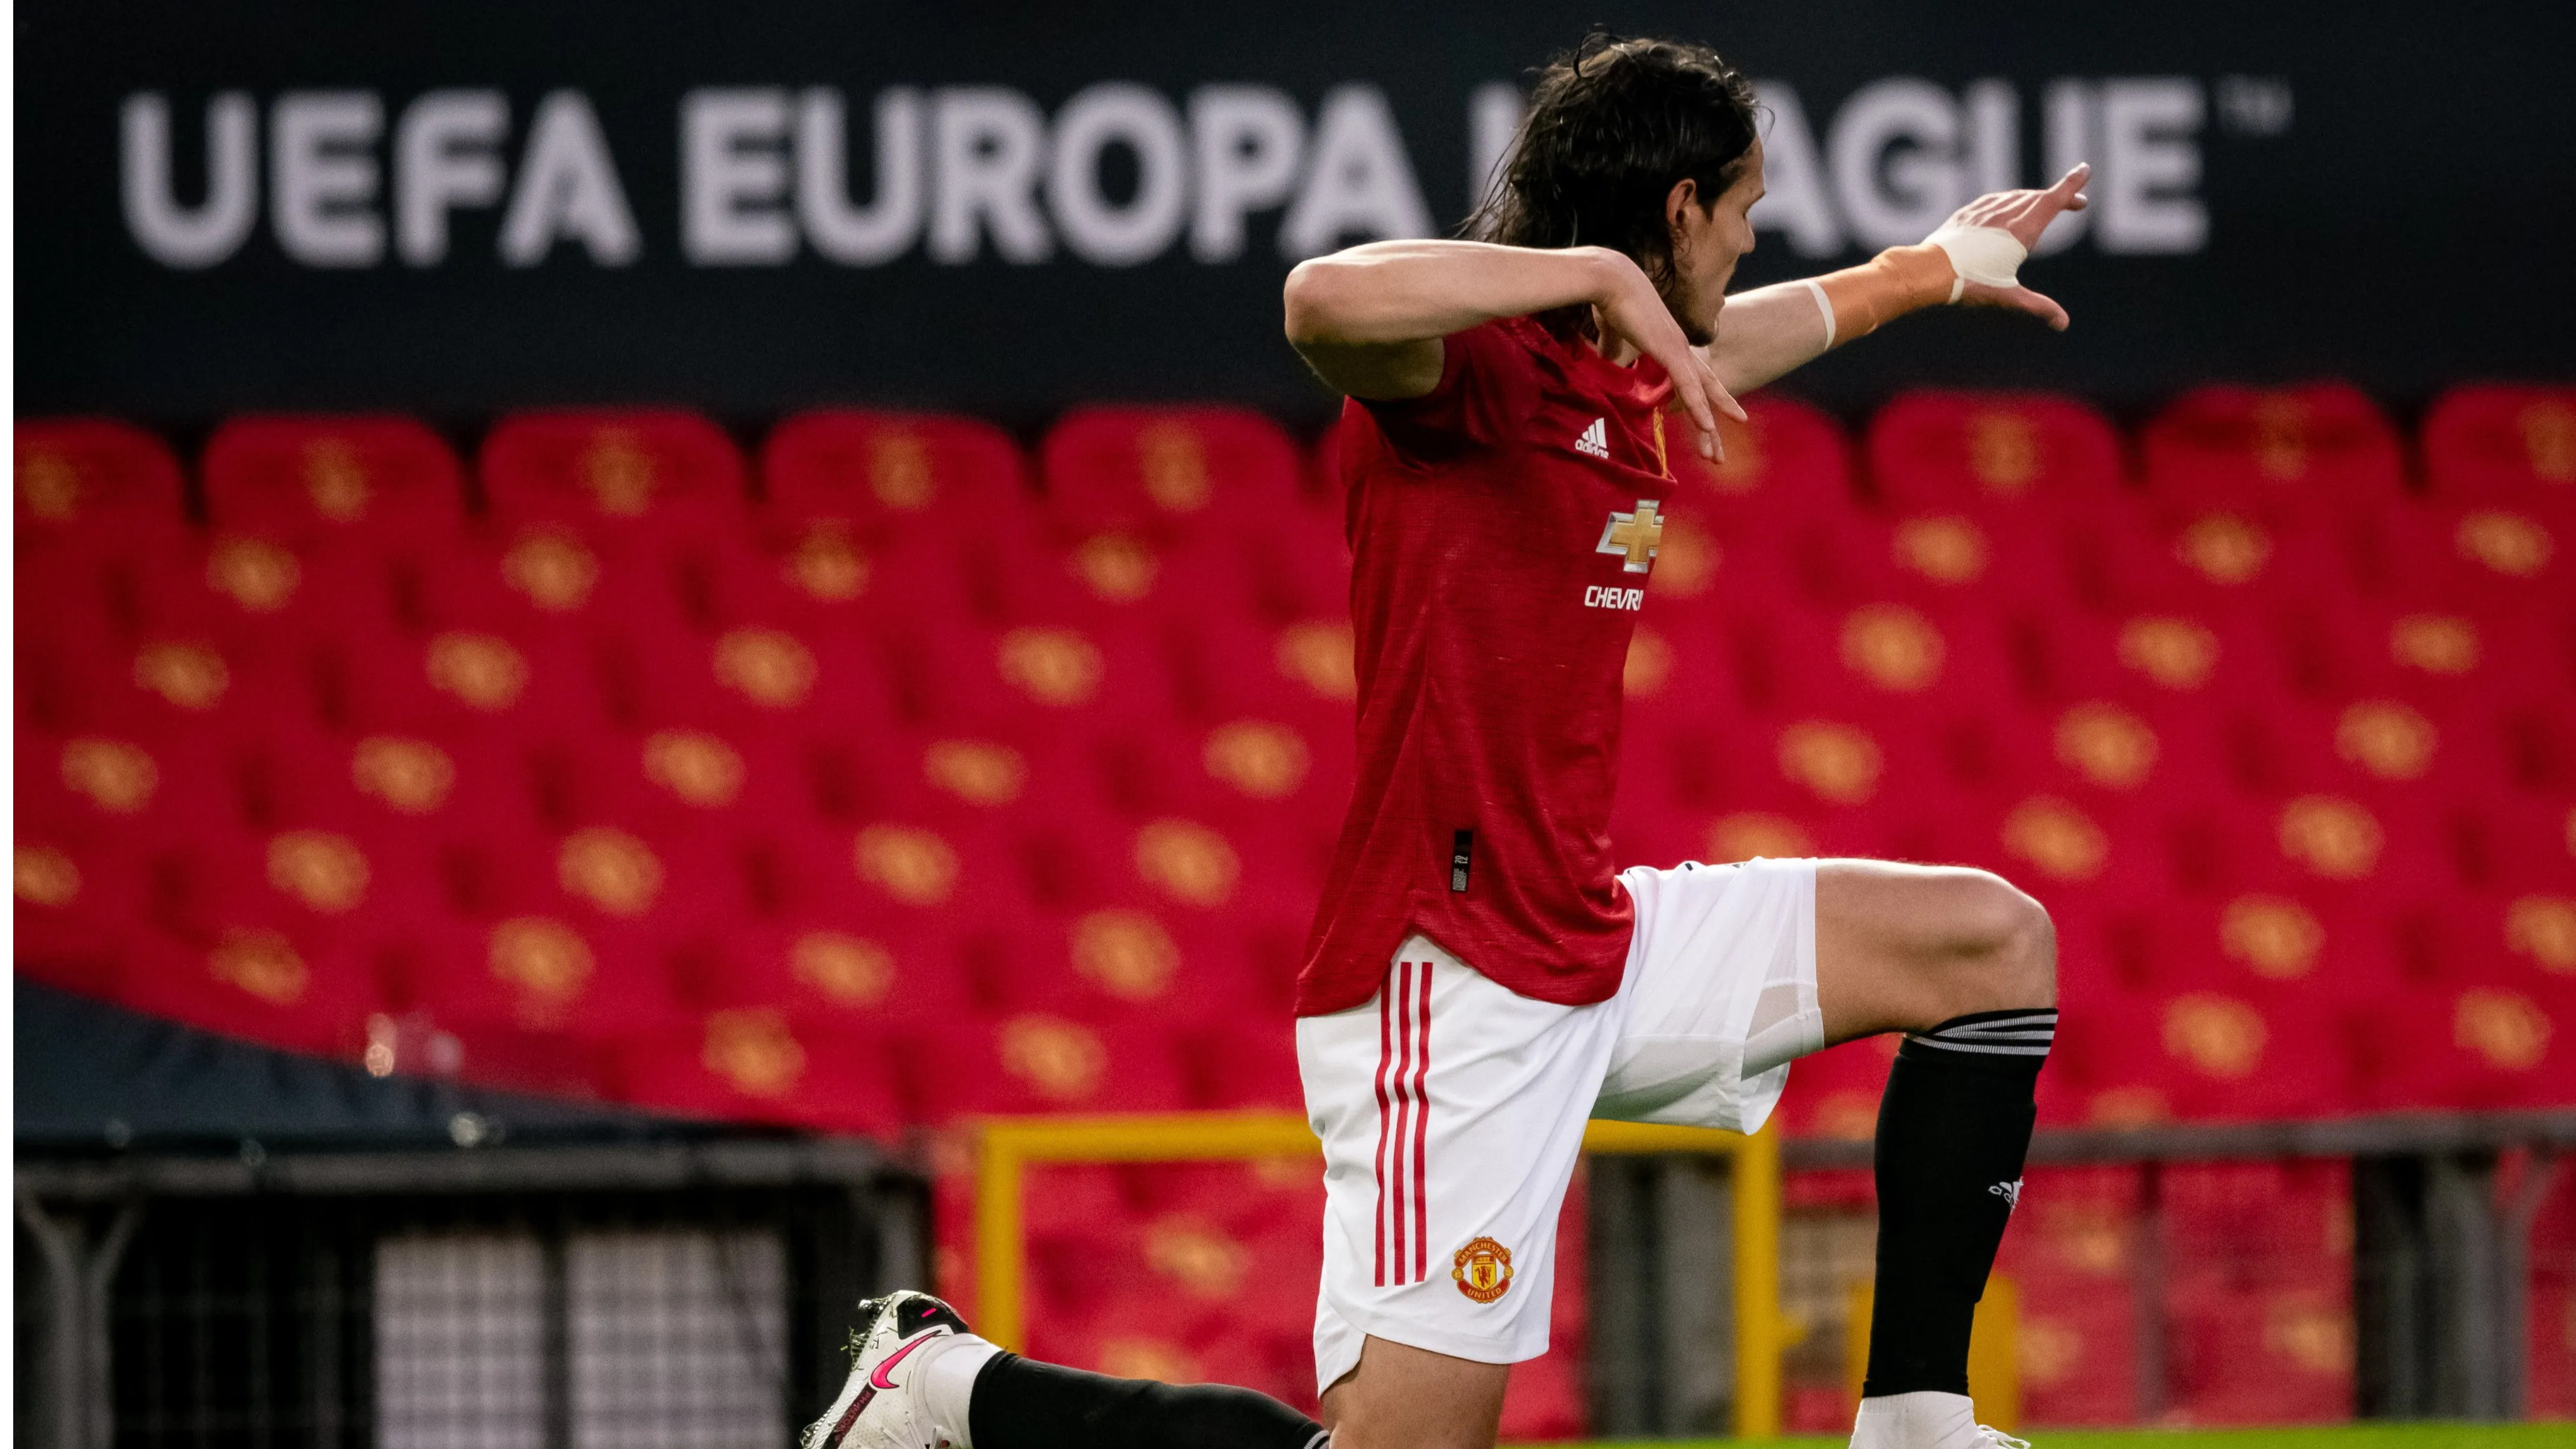 UEL: Manchester United down Granada to set up semifinal tie with Roma